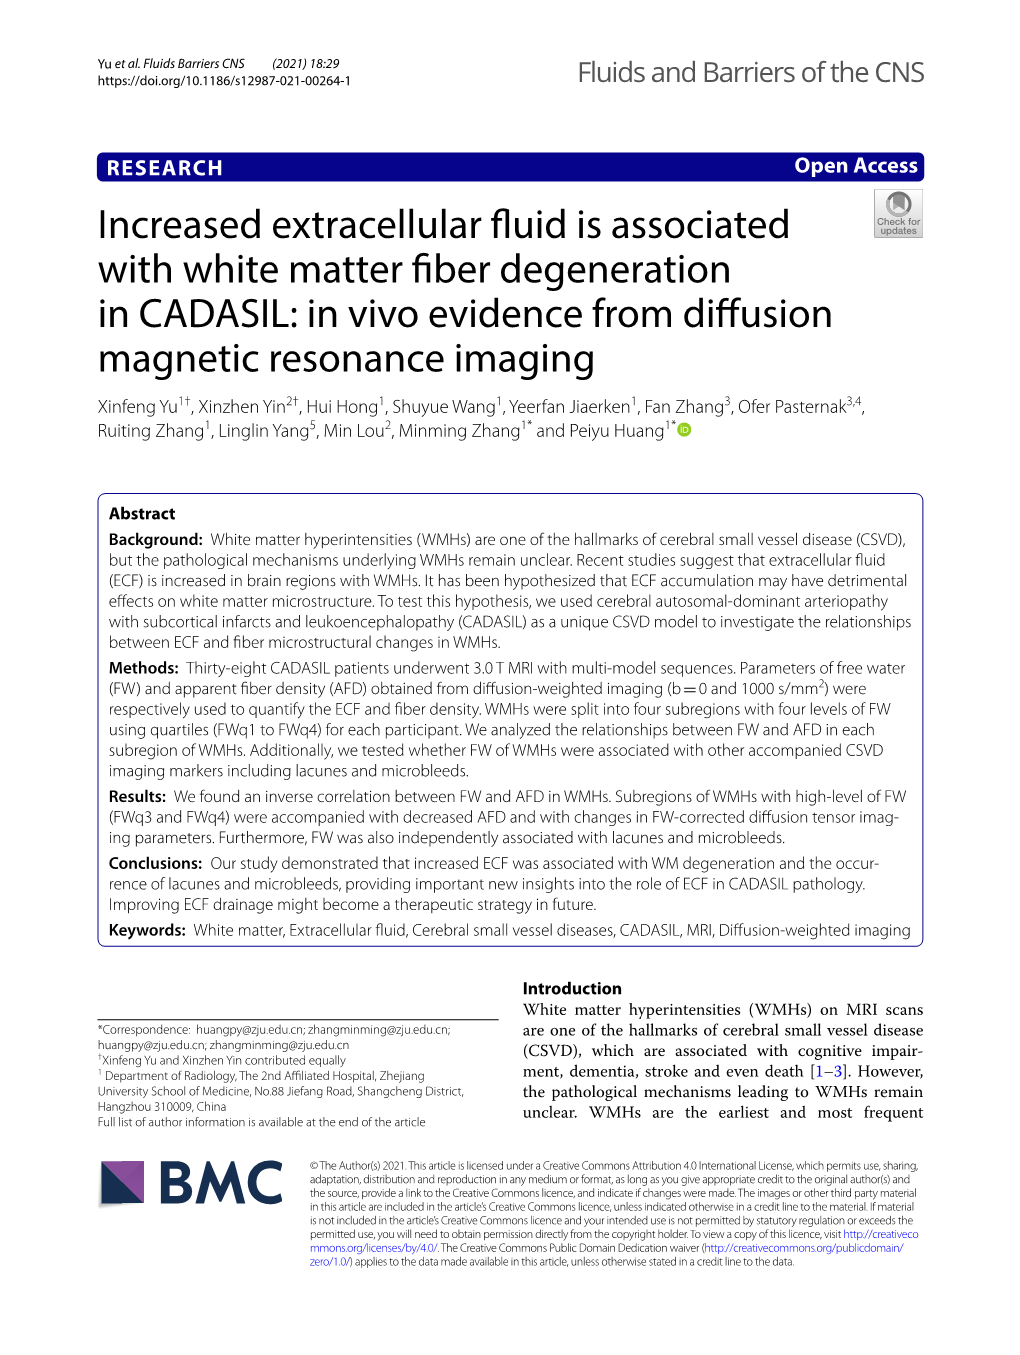 Increased Extracellular Fluid Is Associated with White Matter Fiber